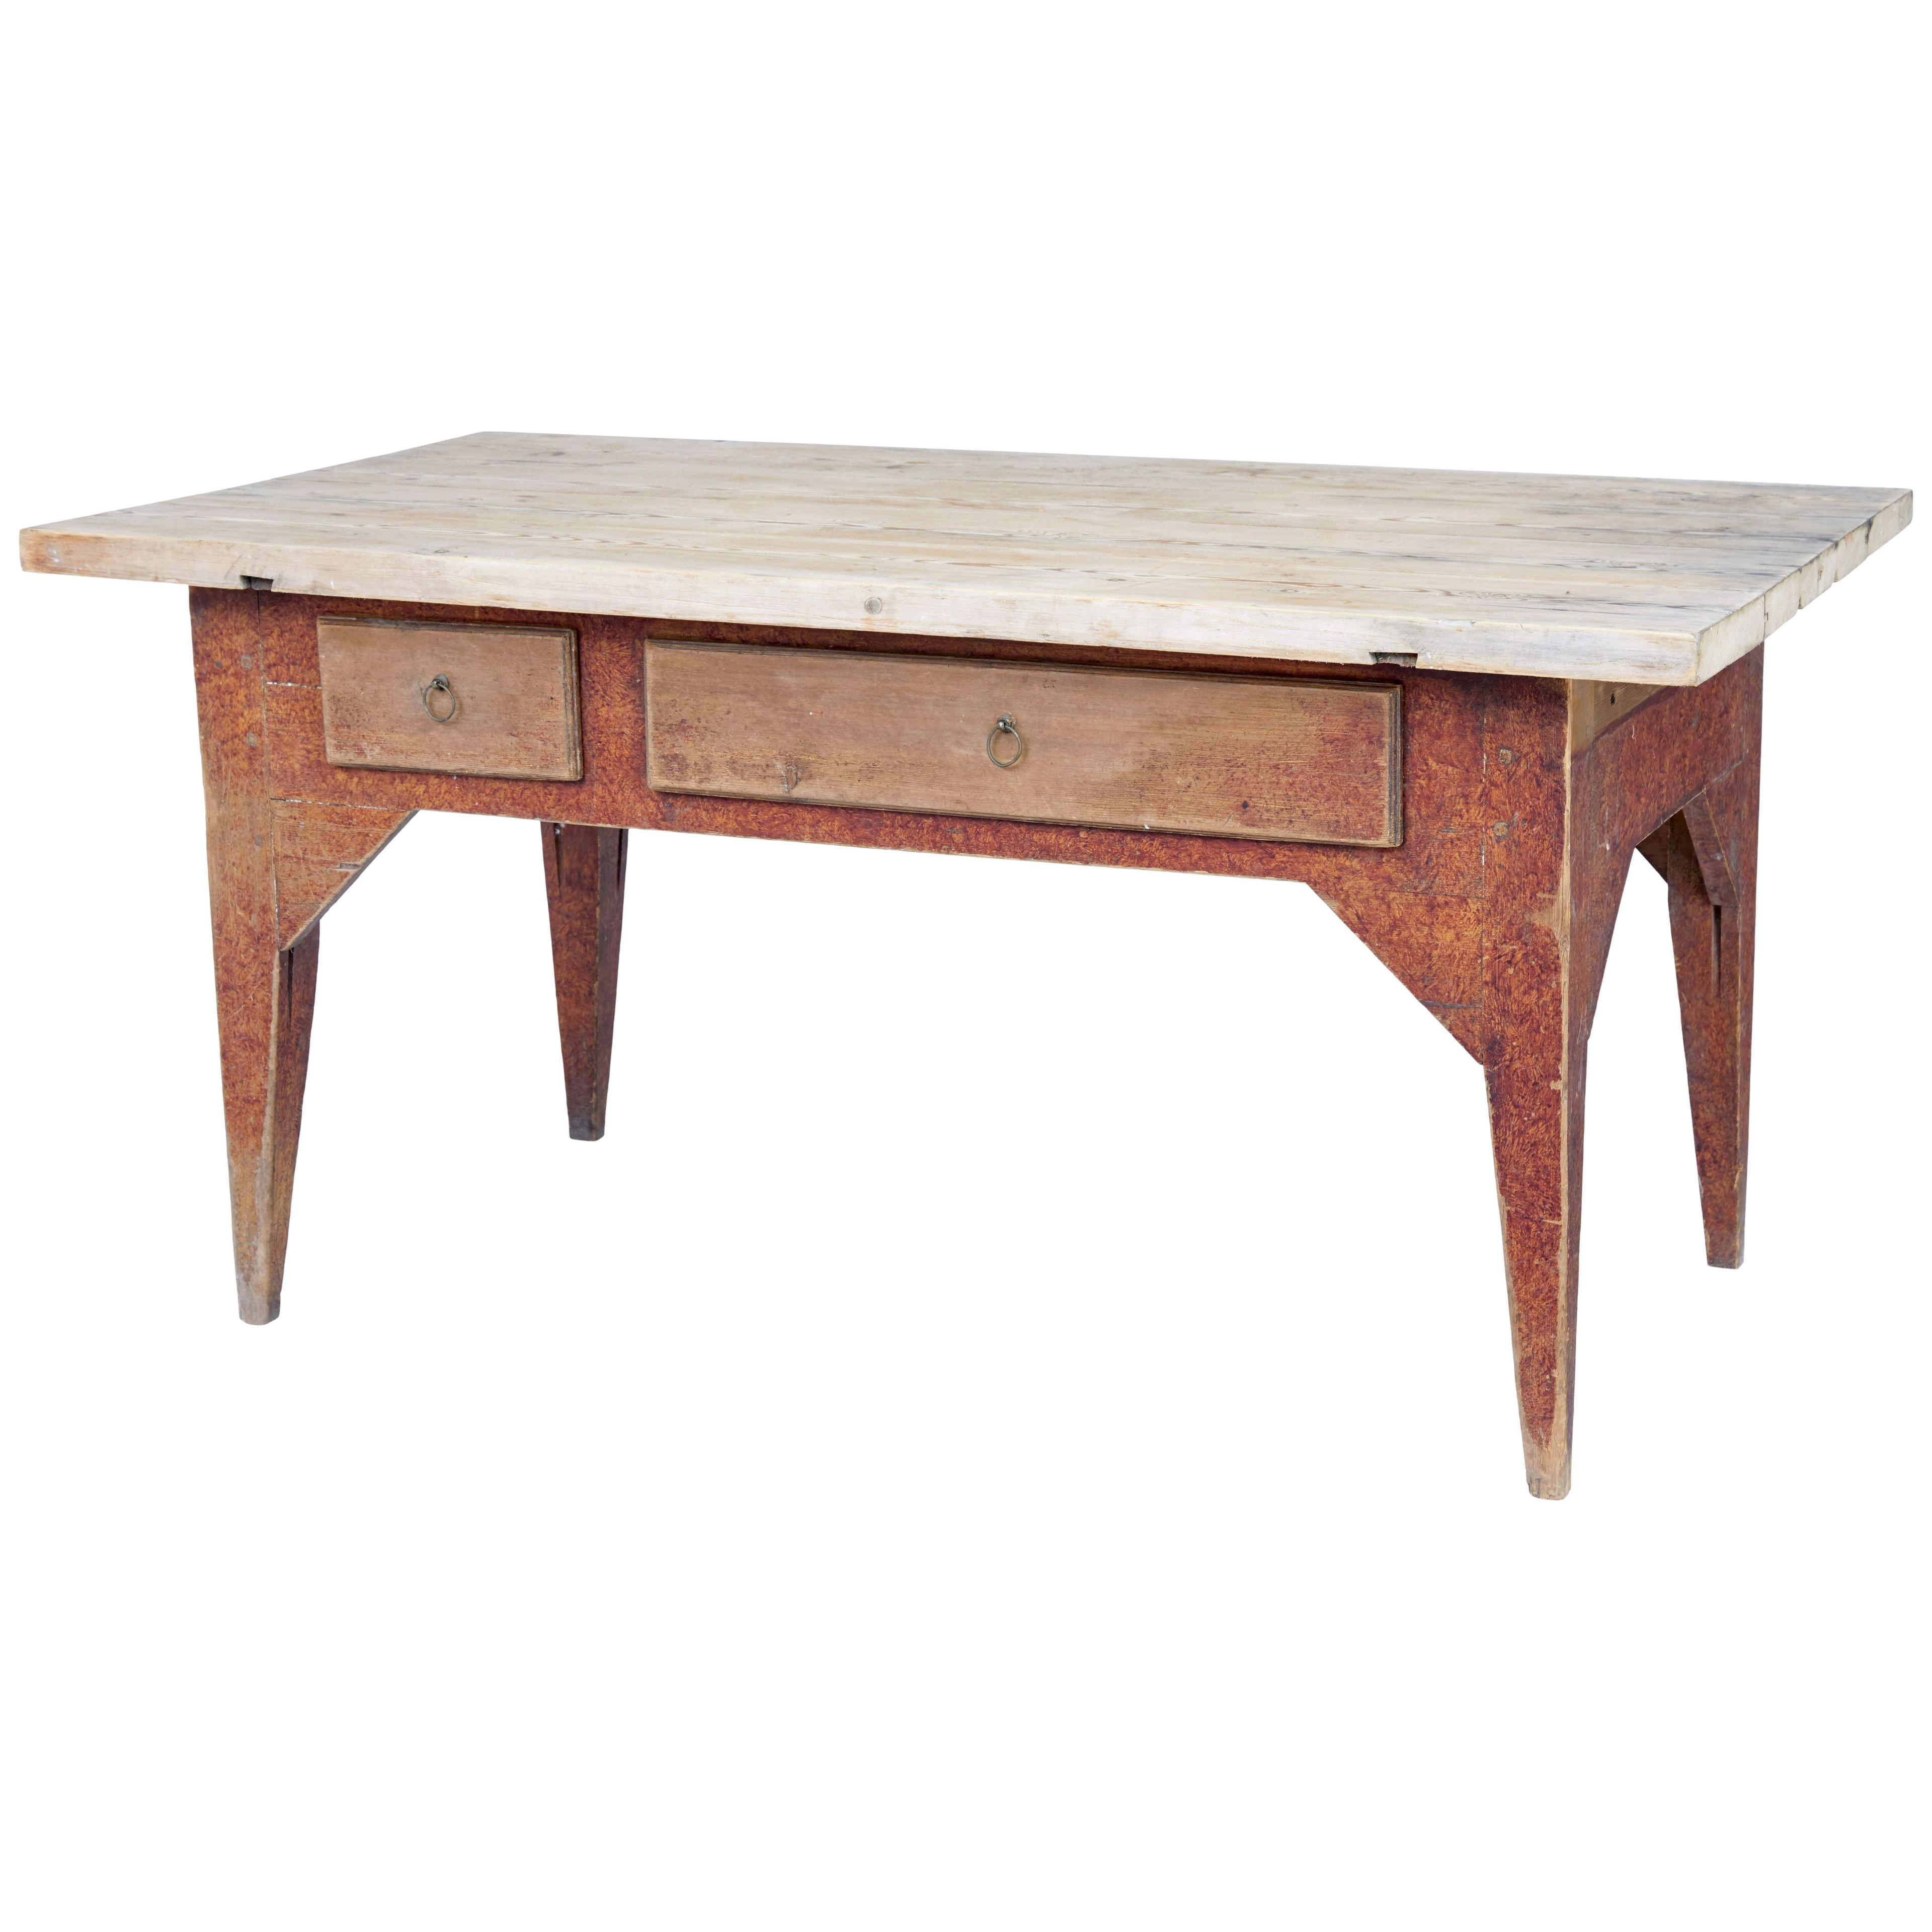 MID 19TH CENTURY RUSTIC PAINTED PINE KITCHEN TABLE